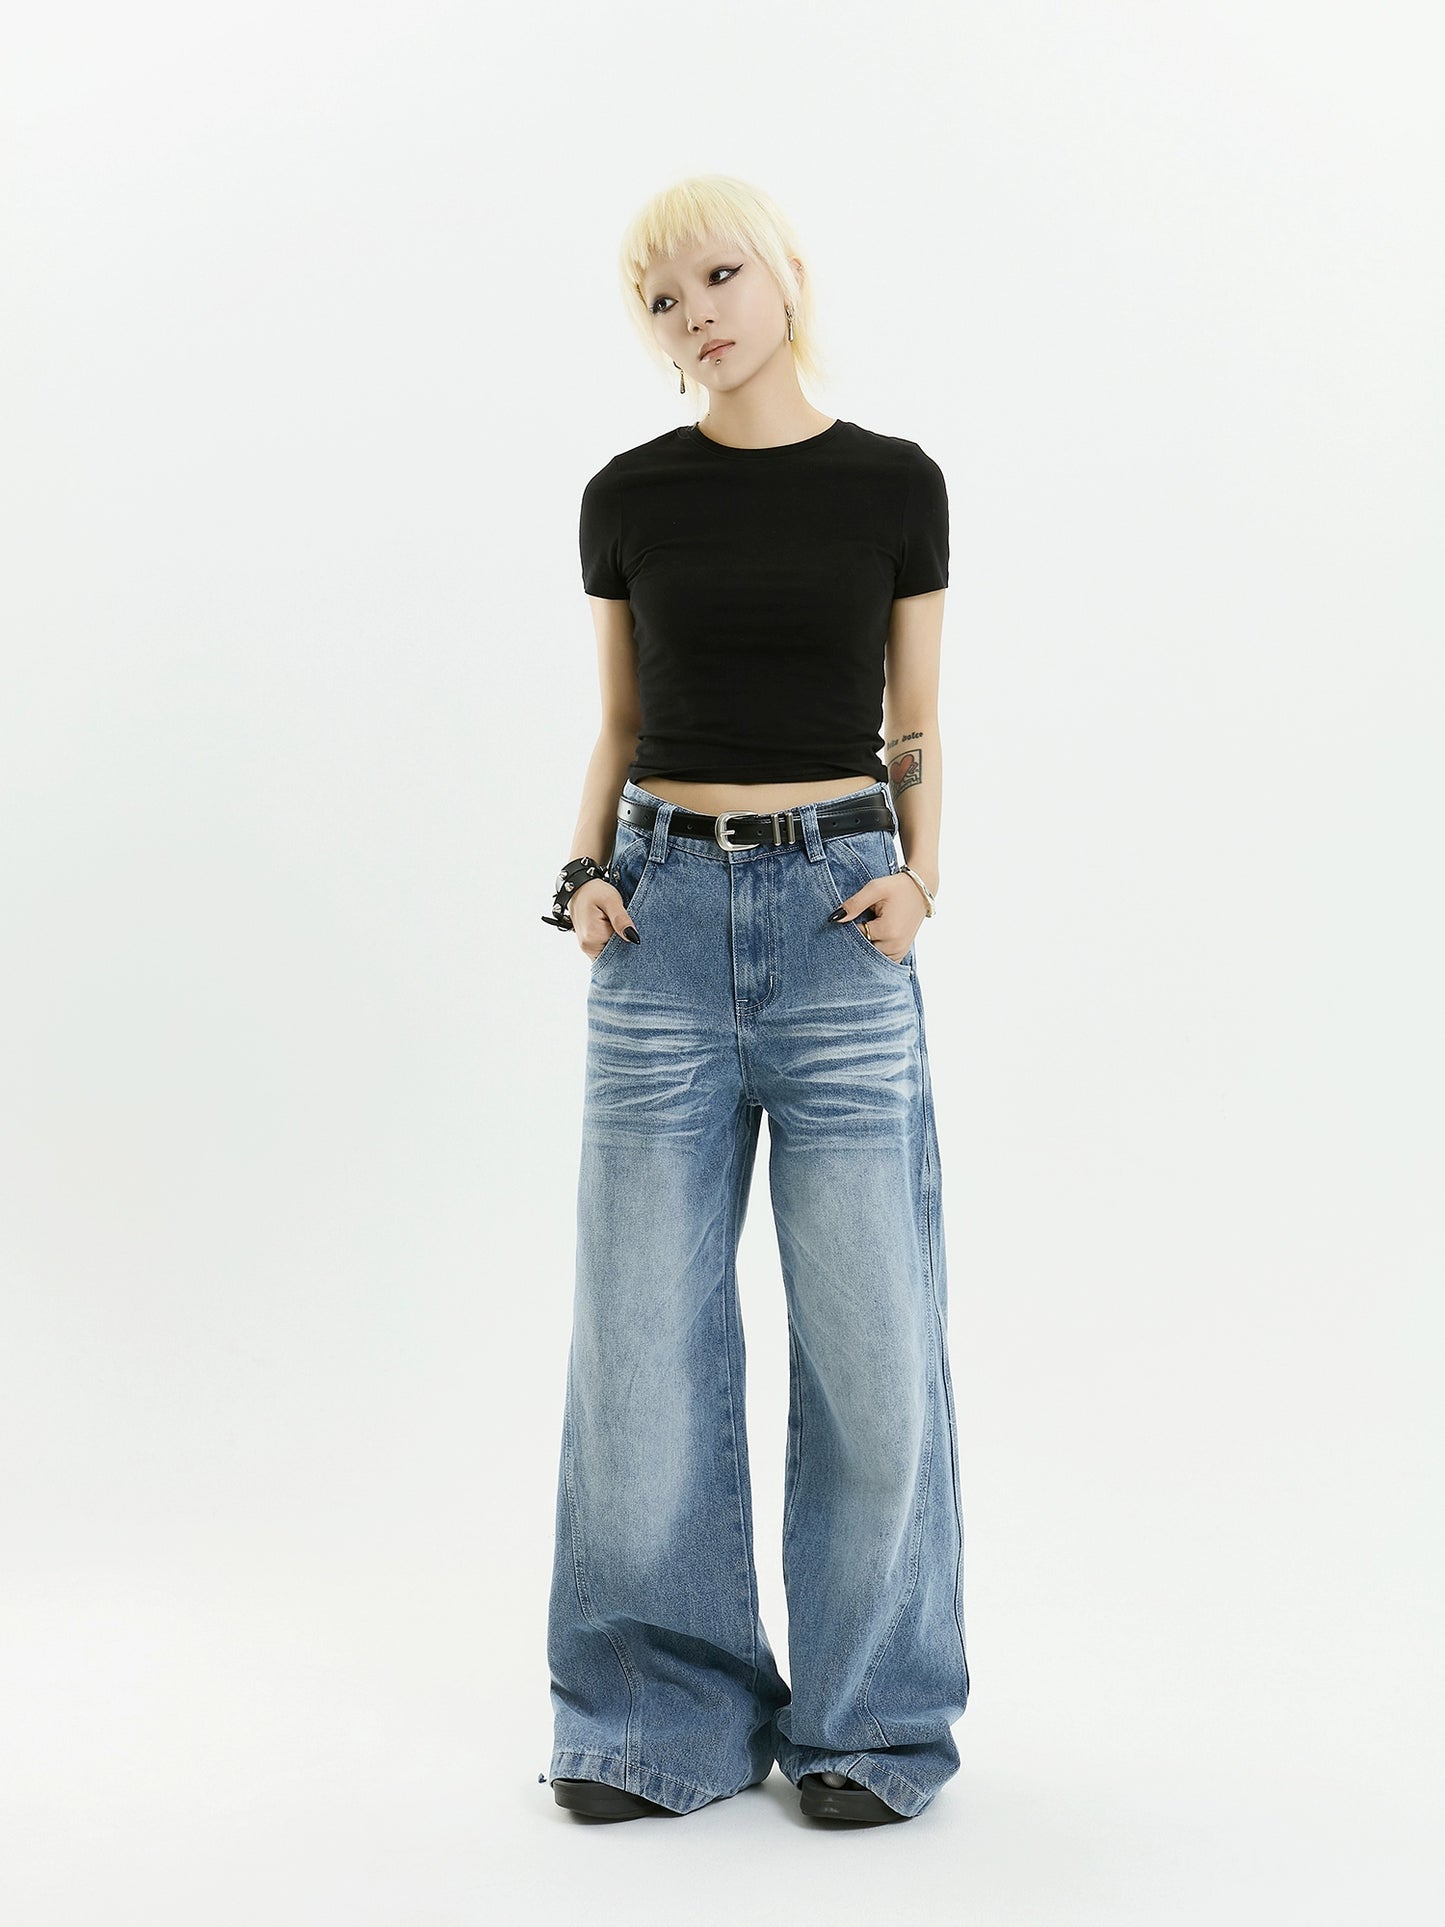 MICHINNYON whiskers distressed textured casual wash wide-leg blue vintage split frayed white jeans